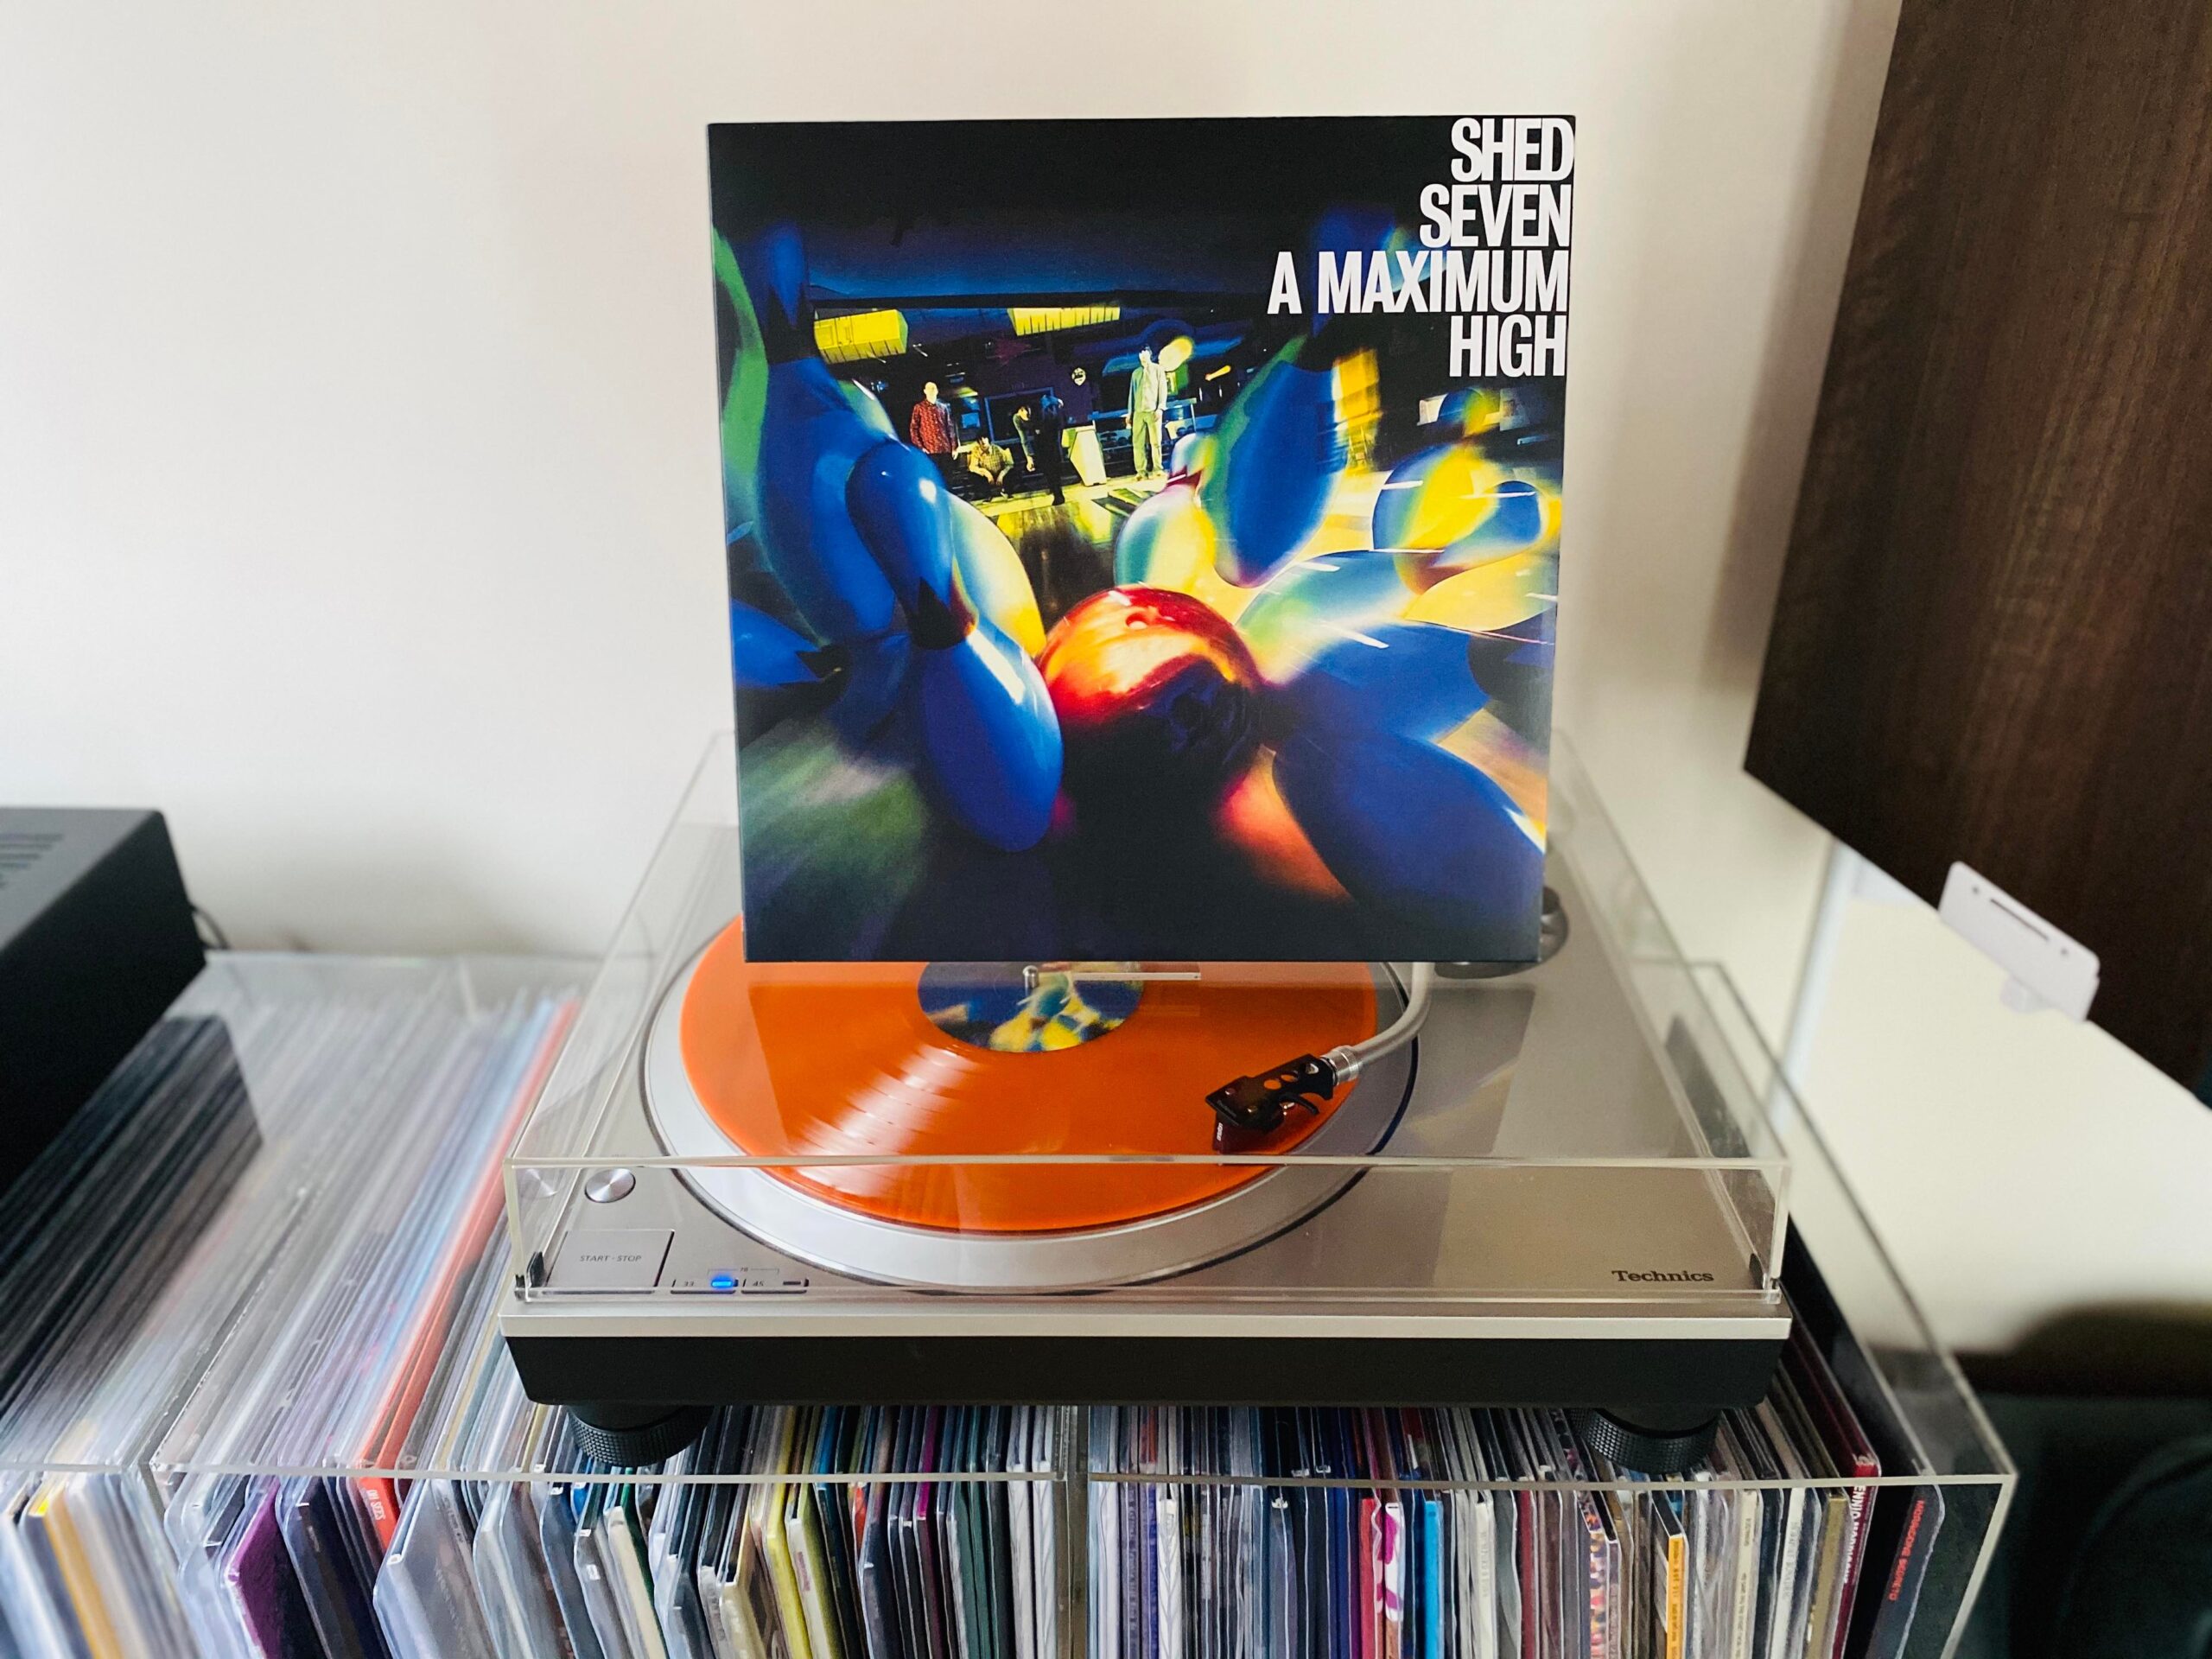 ON THE TURNTABLE: Shed Seven - A Maximum High 